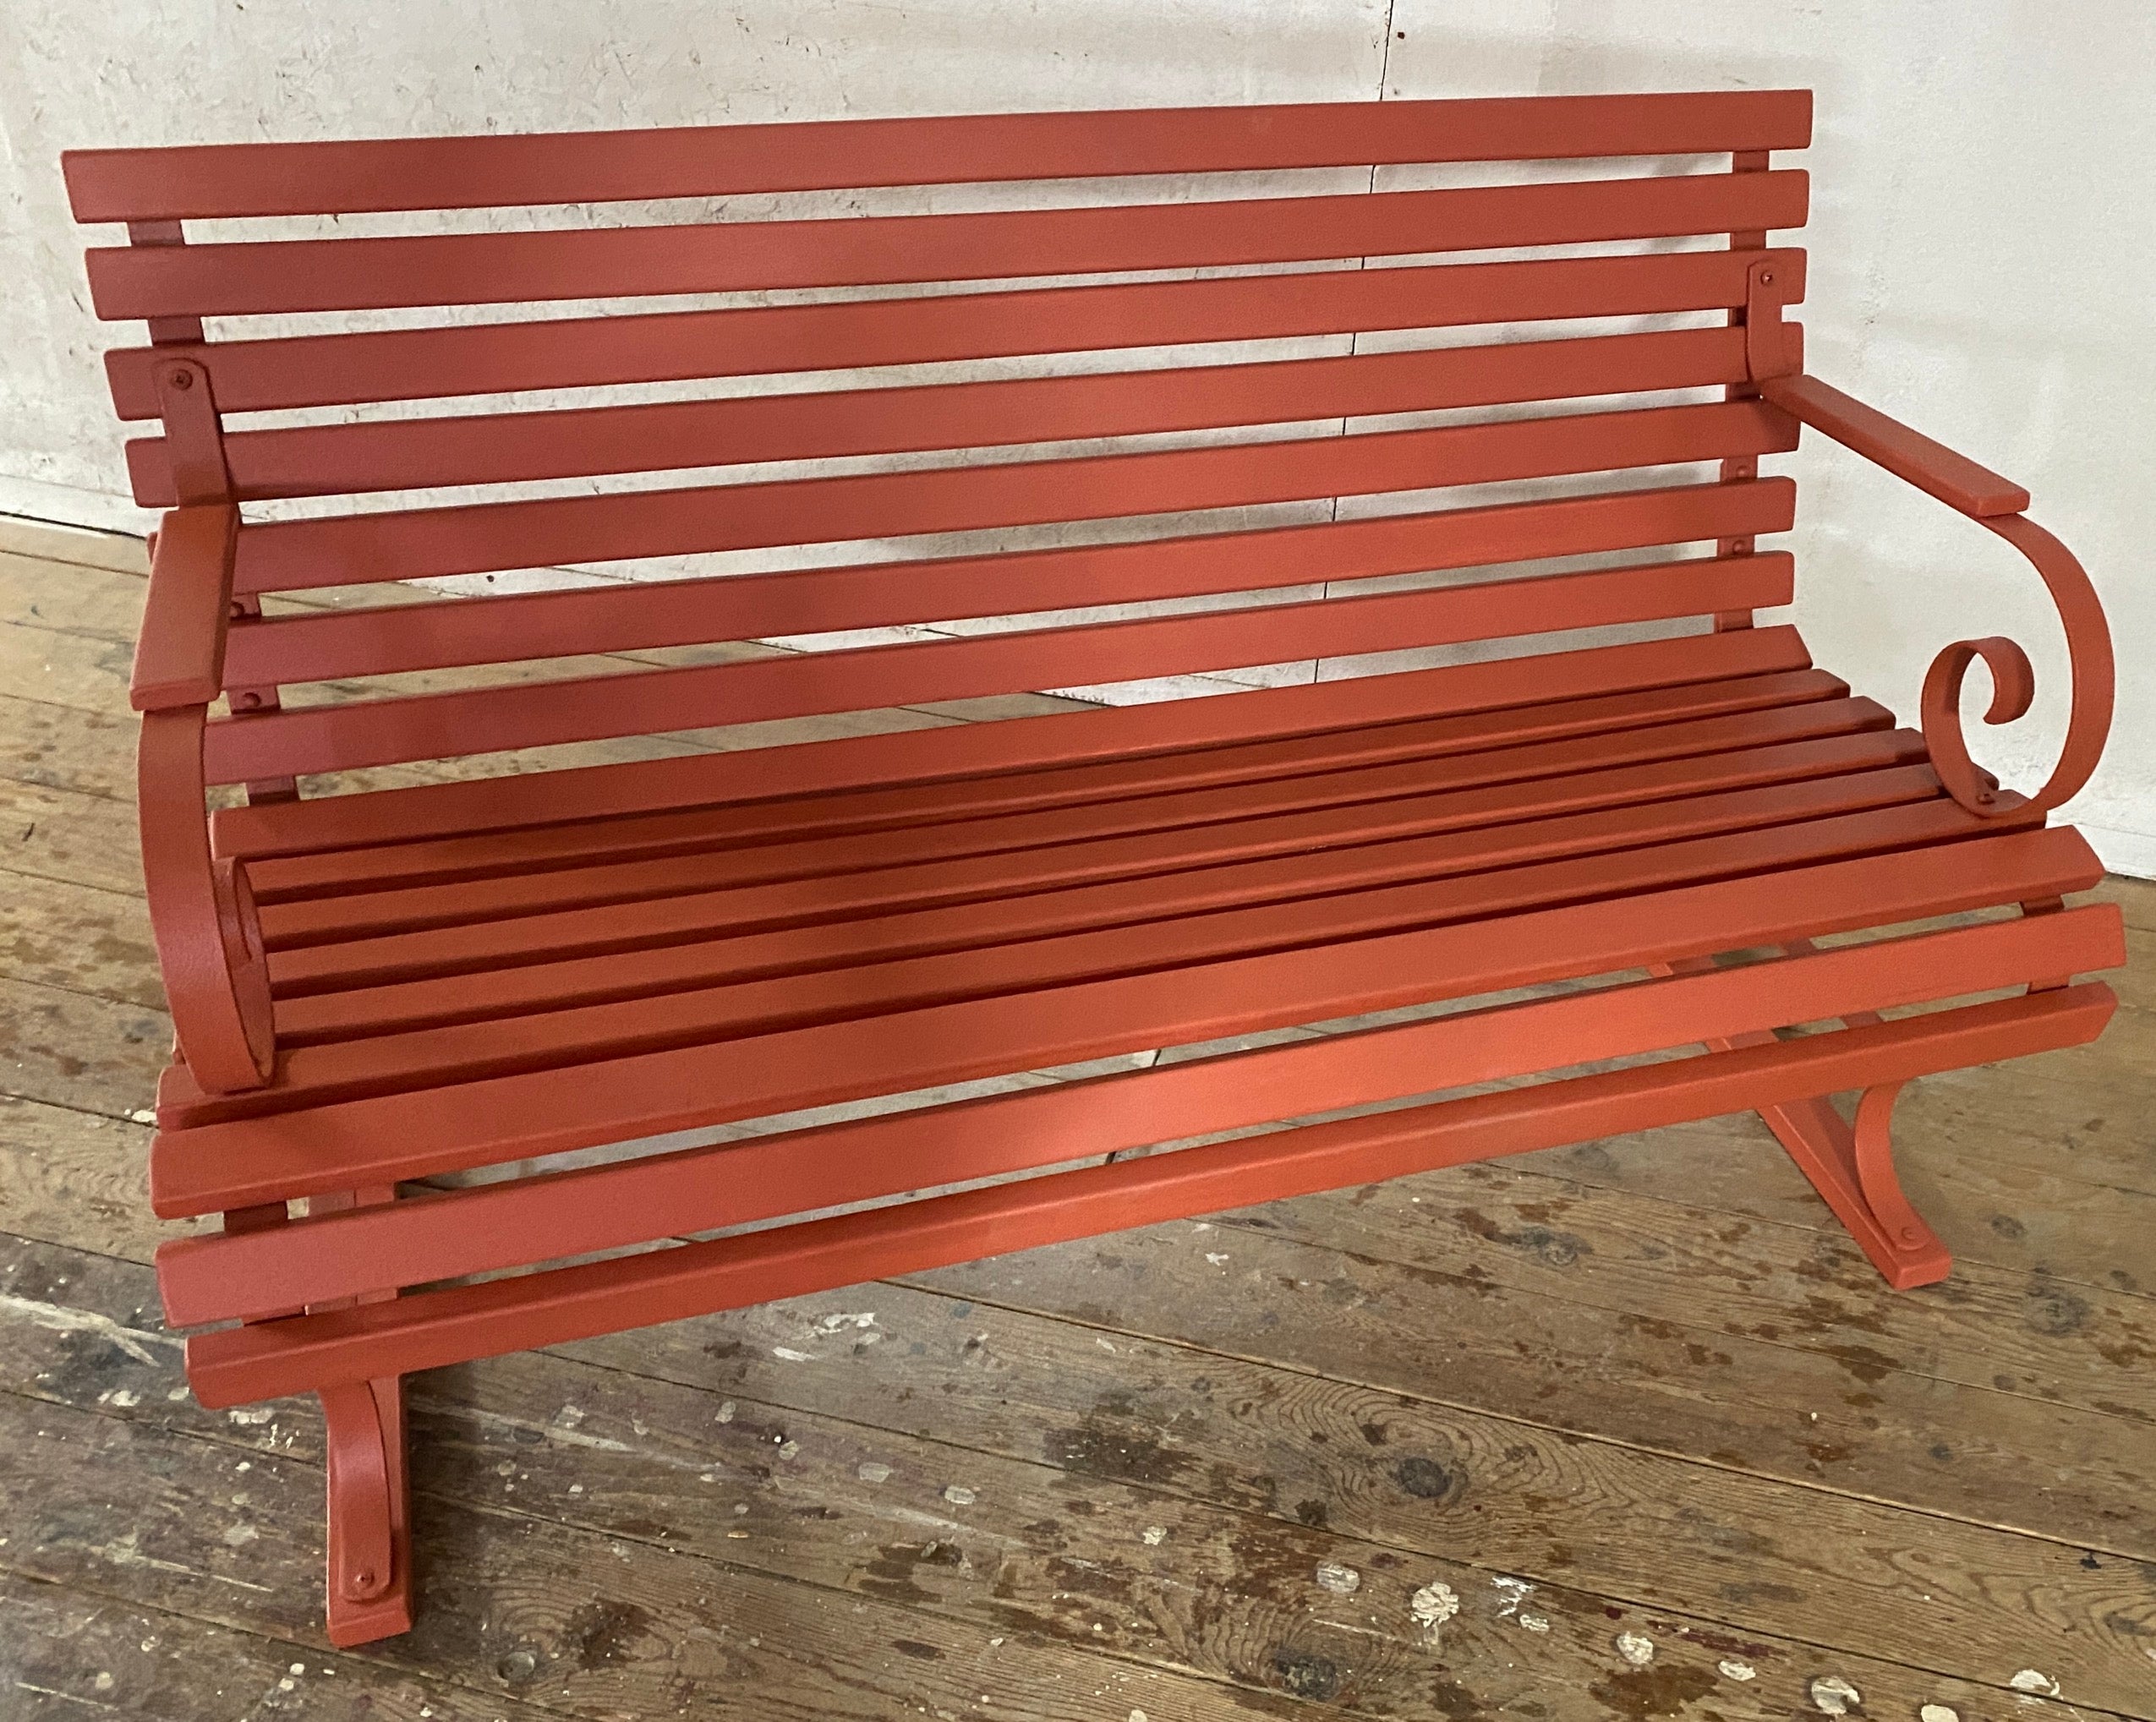 A classic late 19th century, slat design wrought iron park / garden bench with wood slat seat and back. The iron metal frame has graceful curved arms and legs. . 
Wonderful additional seating for a garden dining or under a tree.
Also available, a